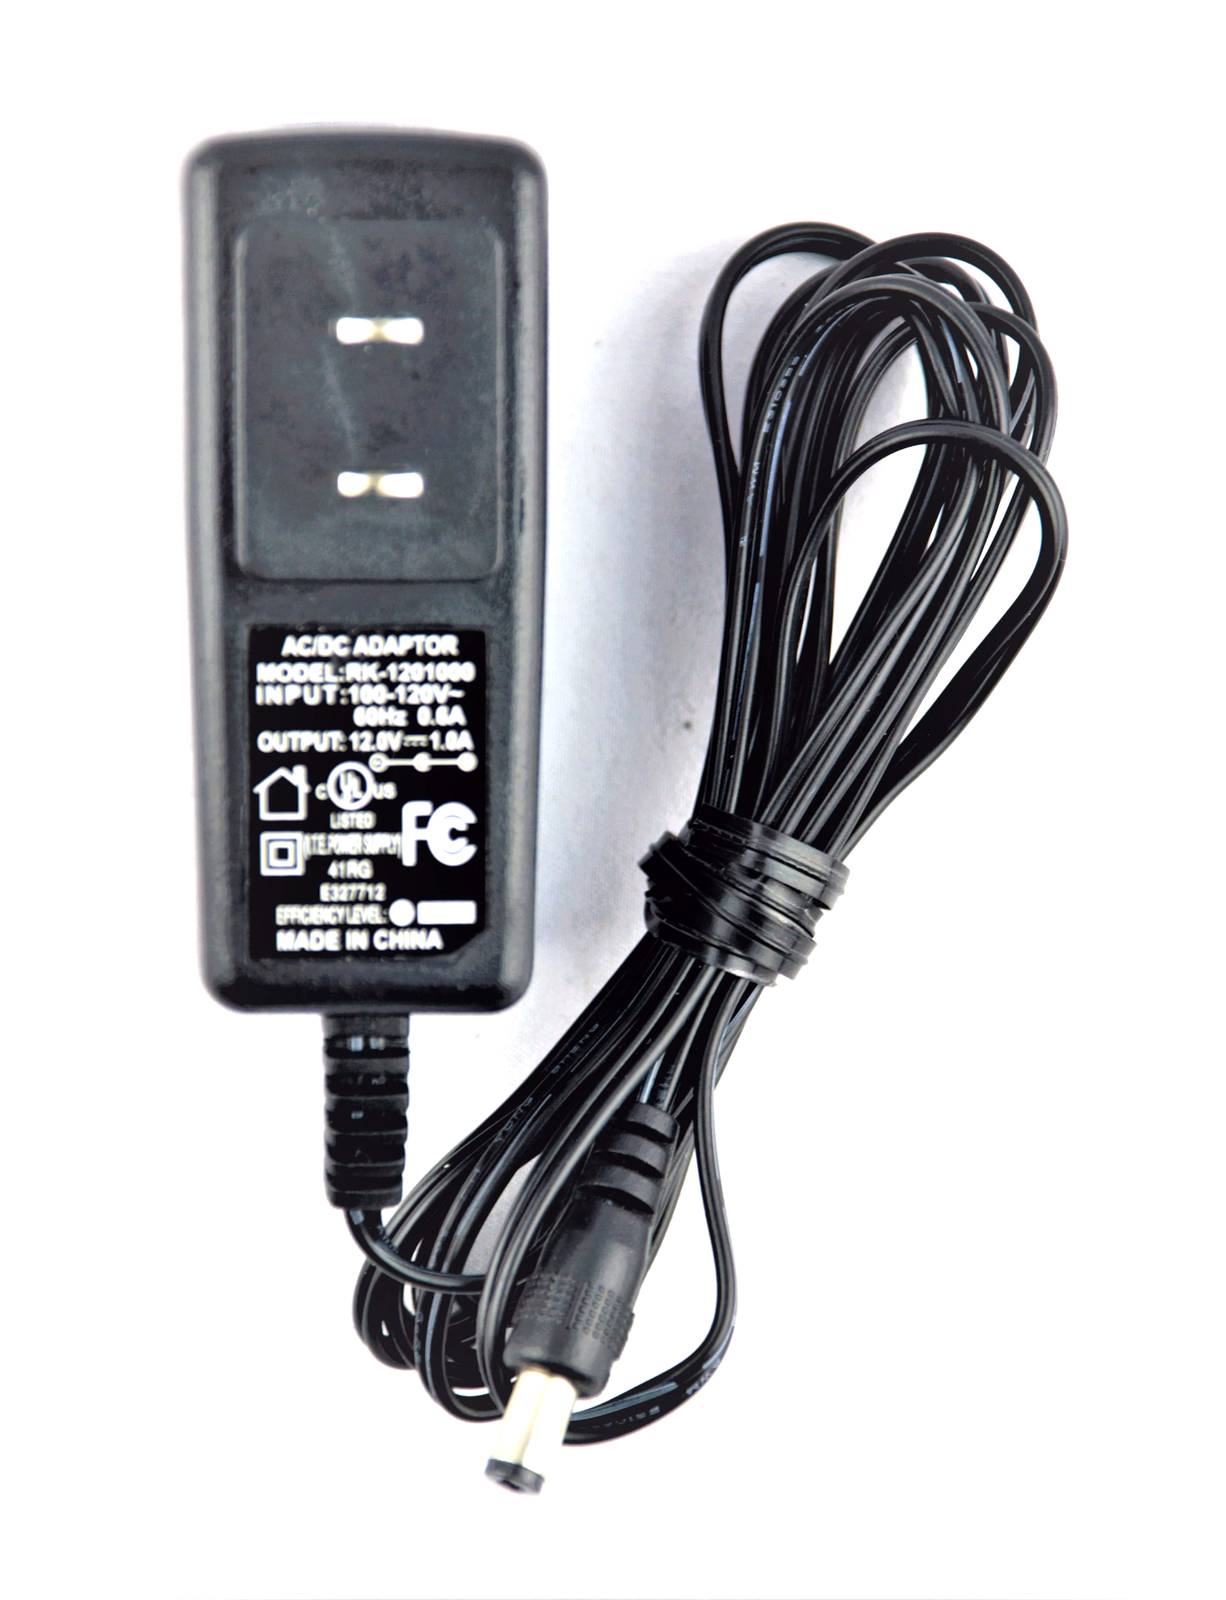 New 12V 1A AC/DC POWER ADAPTER RK-1201000 ITE POWER SUPPLY